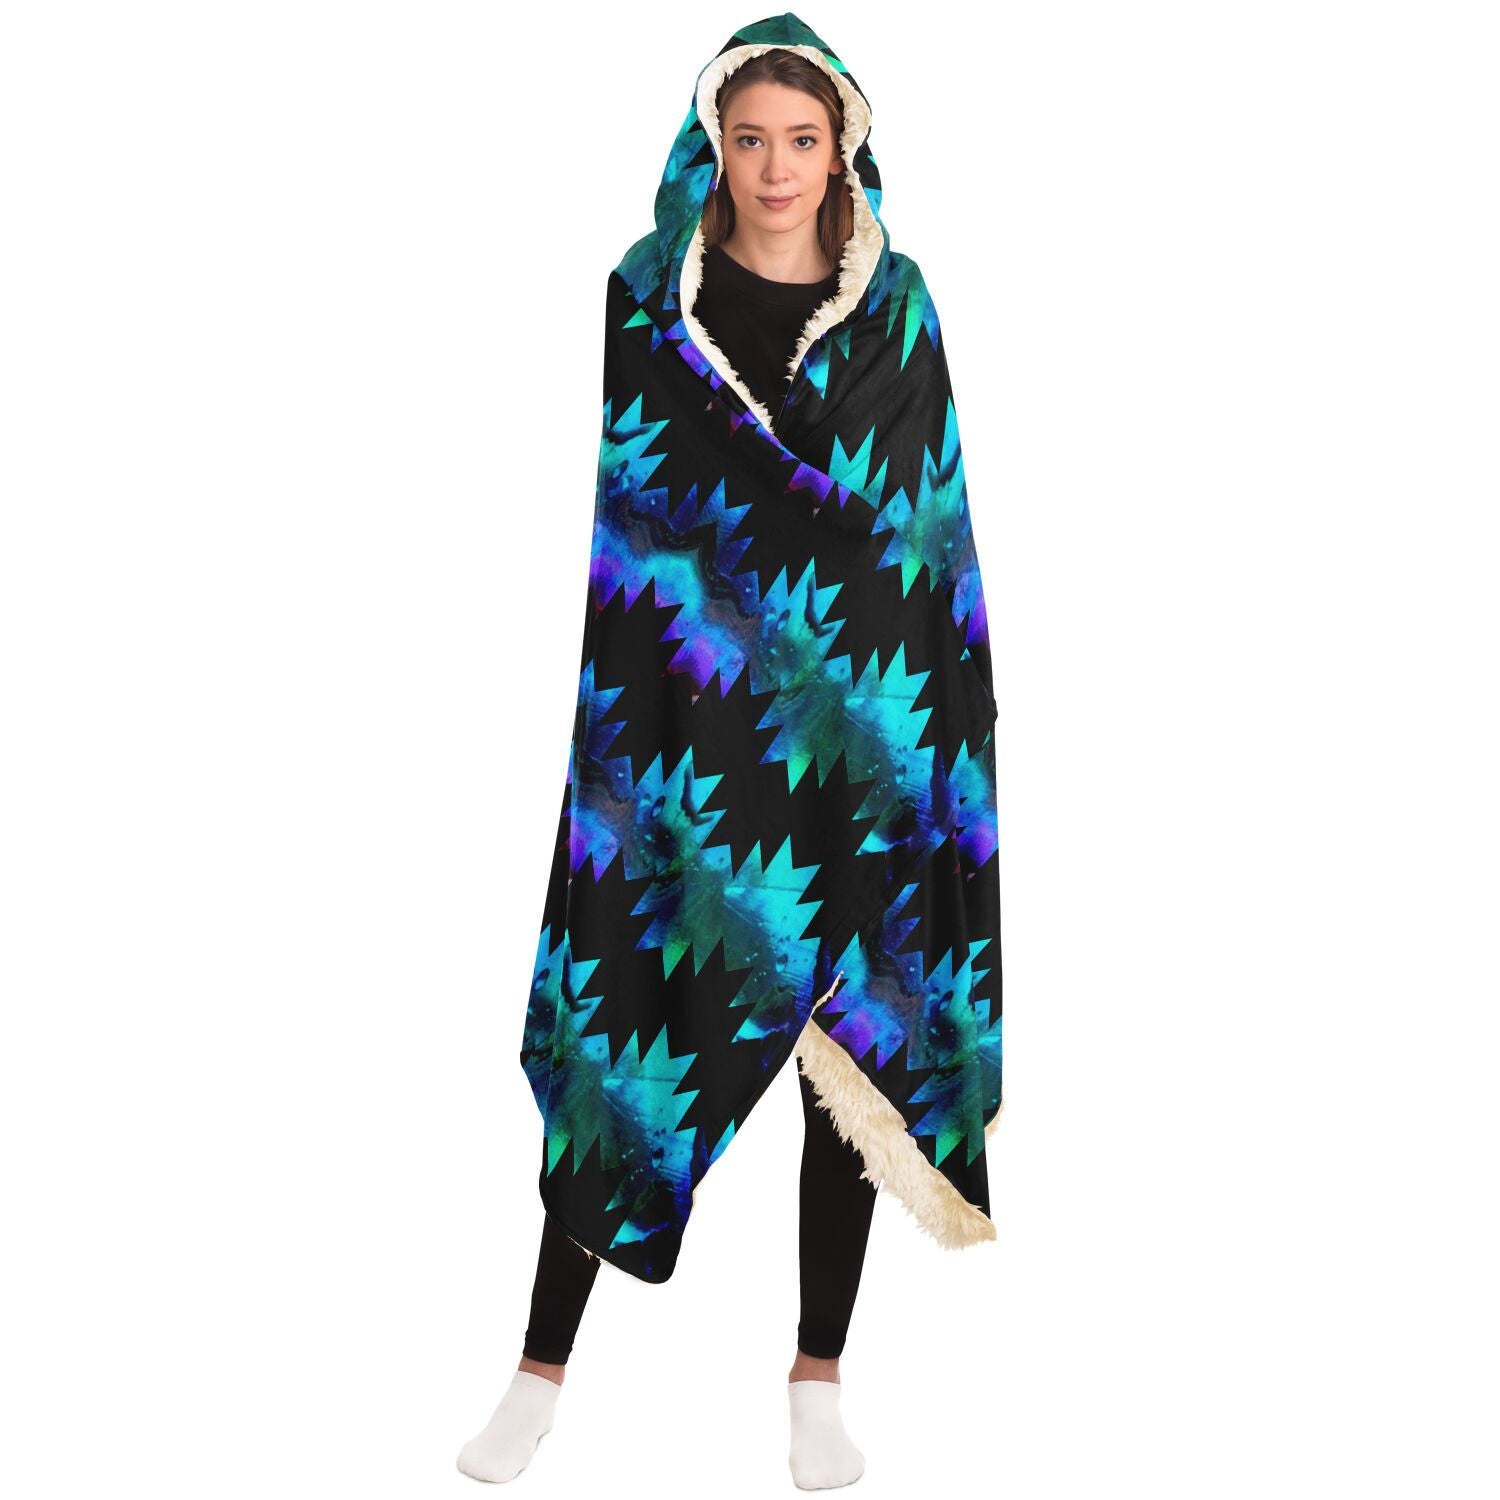 Hooded Blanket With Abalone Swallowtail Design